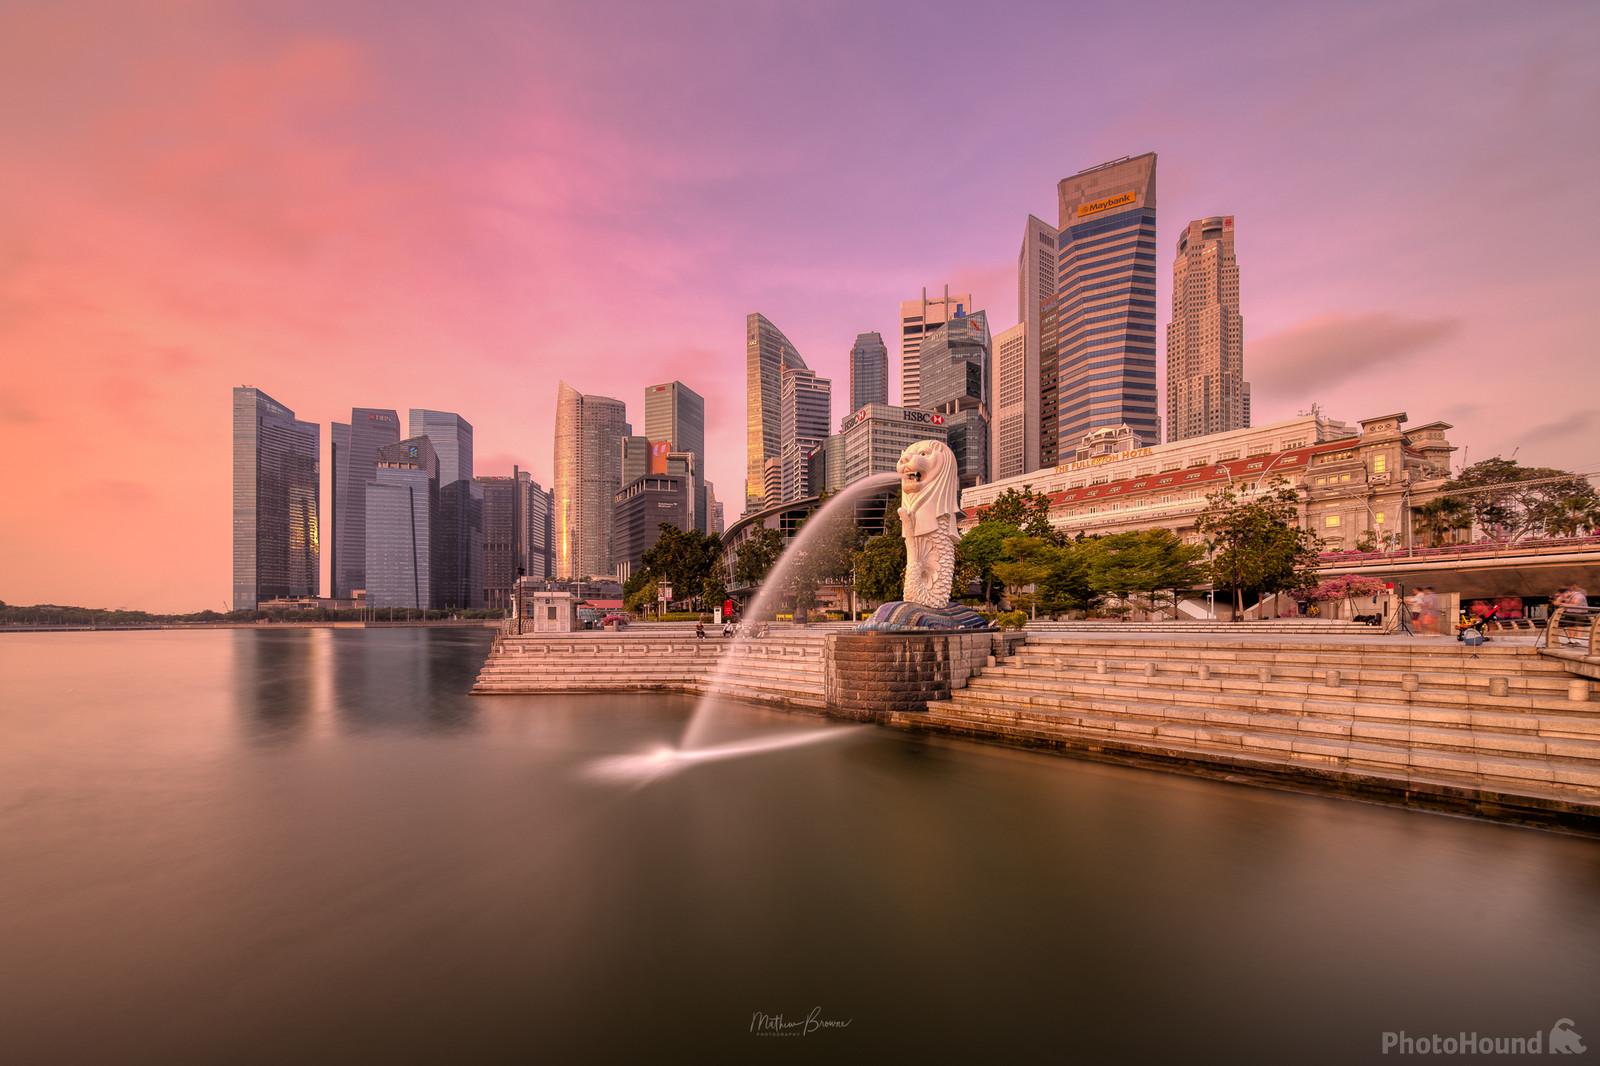 Image of Merlion Park by Mathew Browne